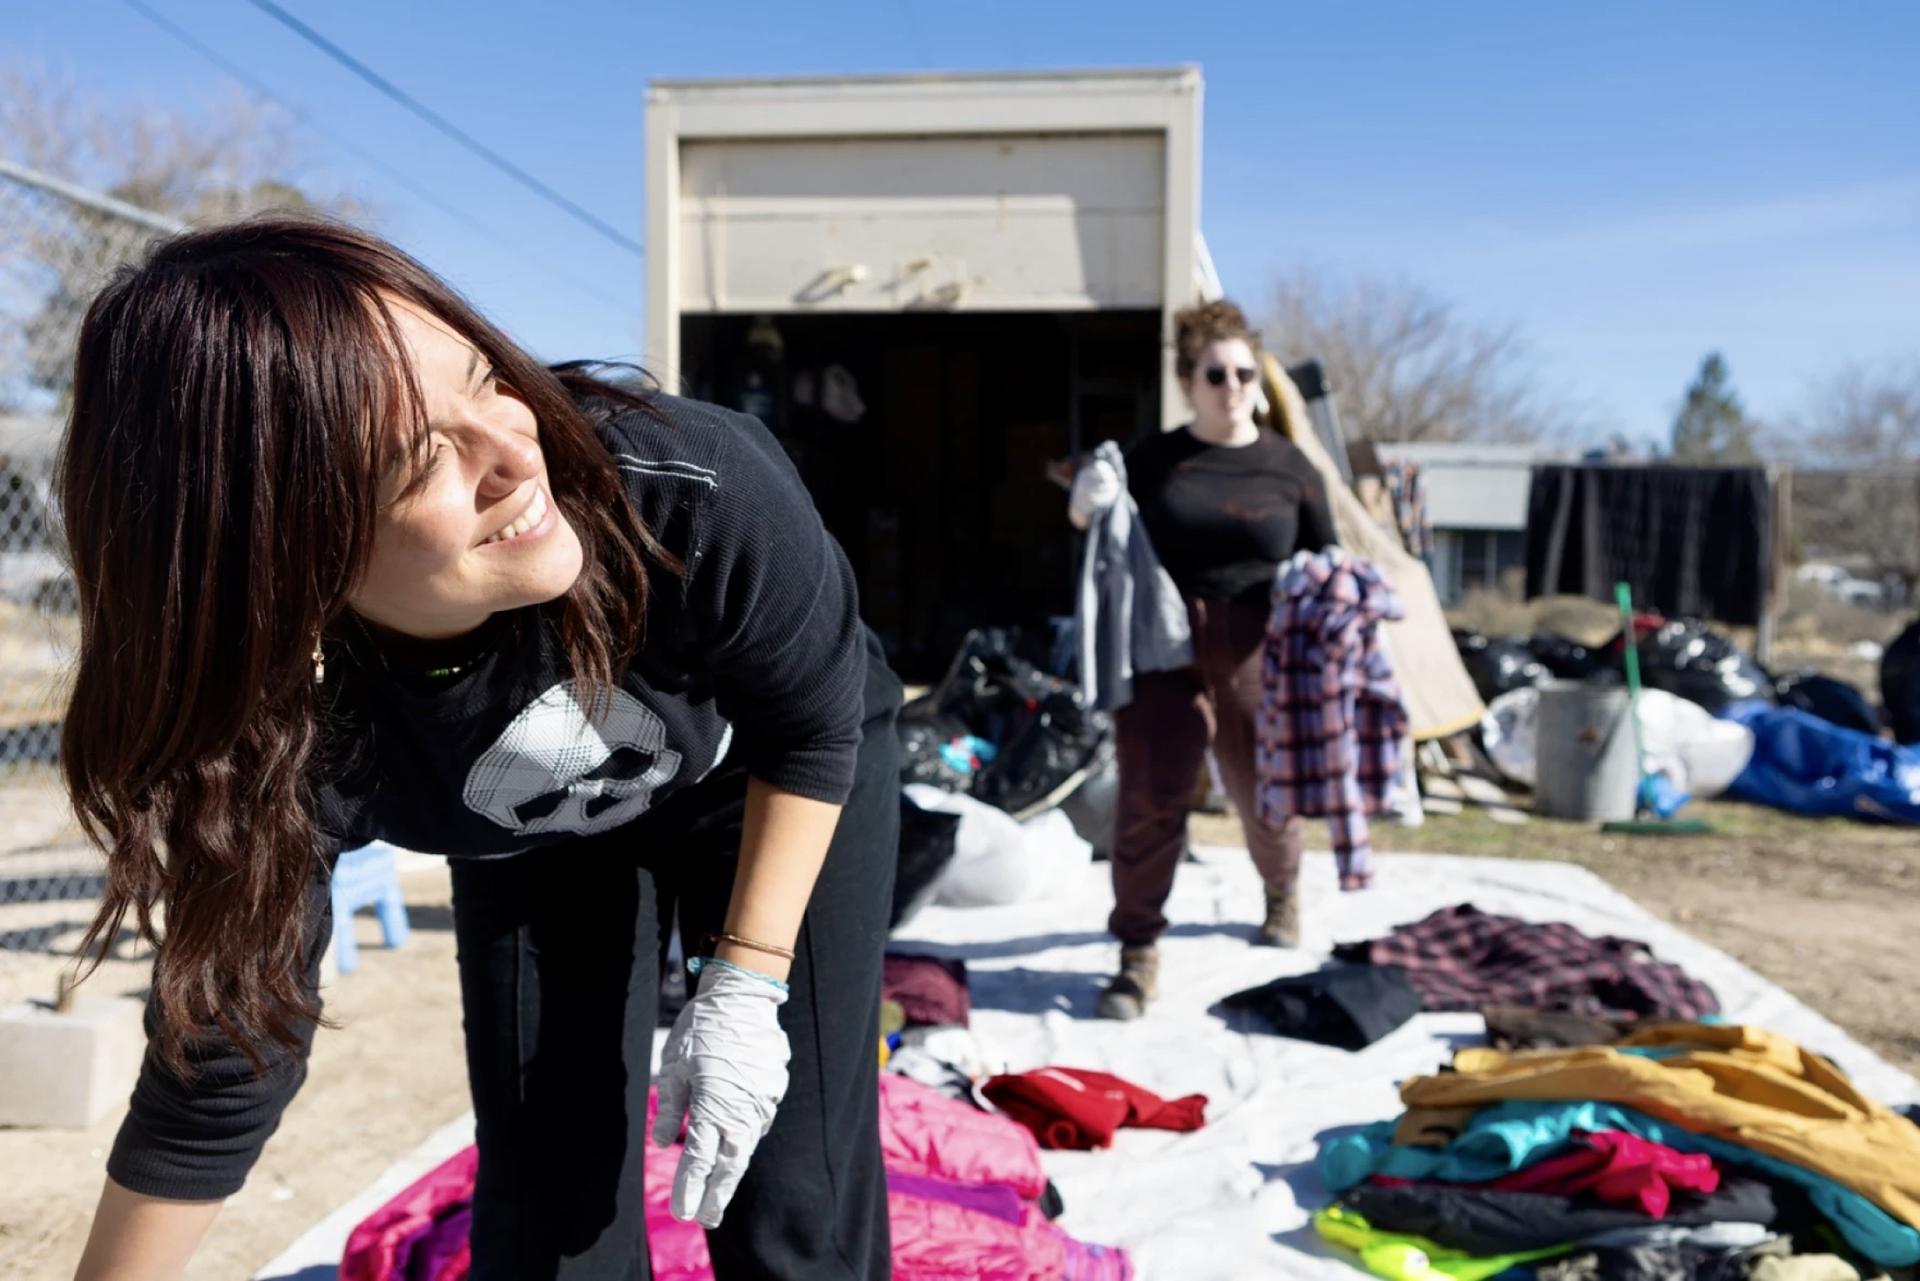 Catalina Torres, who works with Al Otro Lado to deliver aid to migrants, organizes donated clothing at the Youth Center in Jacumba Hot Springs.